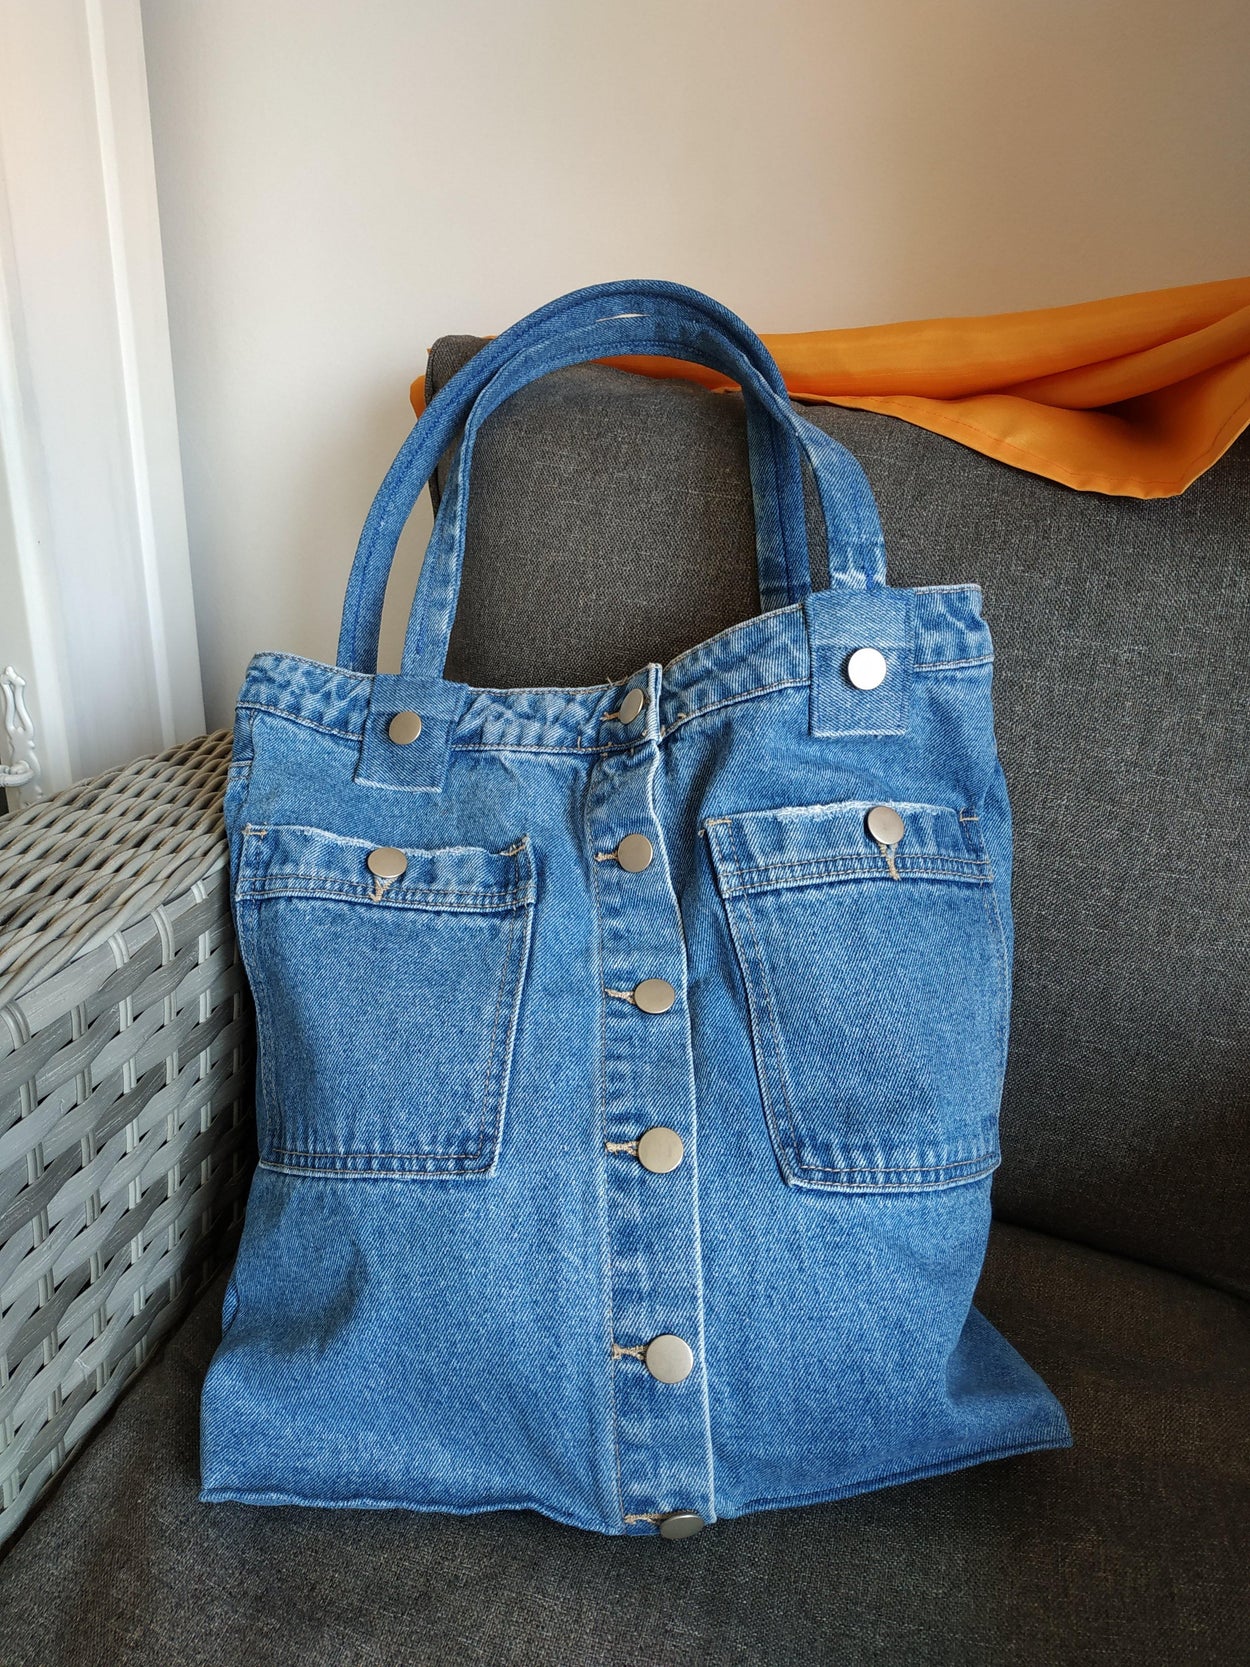  Denim Tote Bag, Jean purses for women denim, Bojo Blue Jean Tote  with multiple shades of denim which make the patterns of this denim bag, jean  tote bag for women with